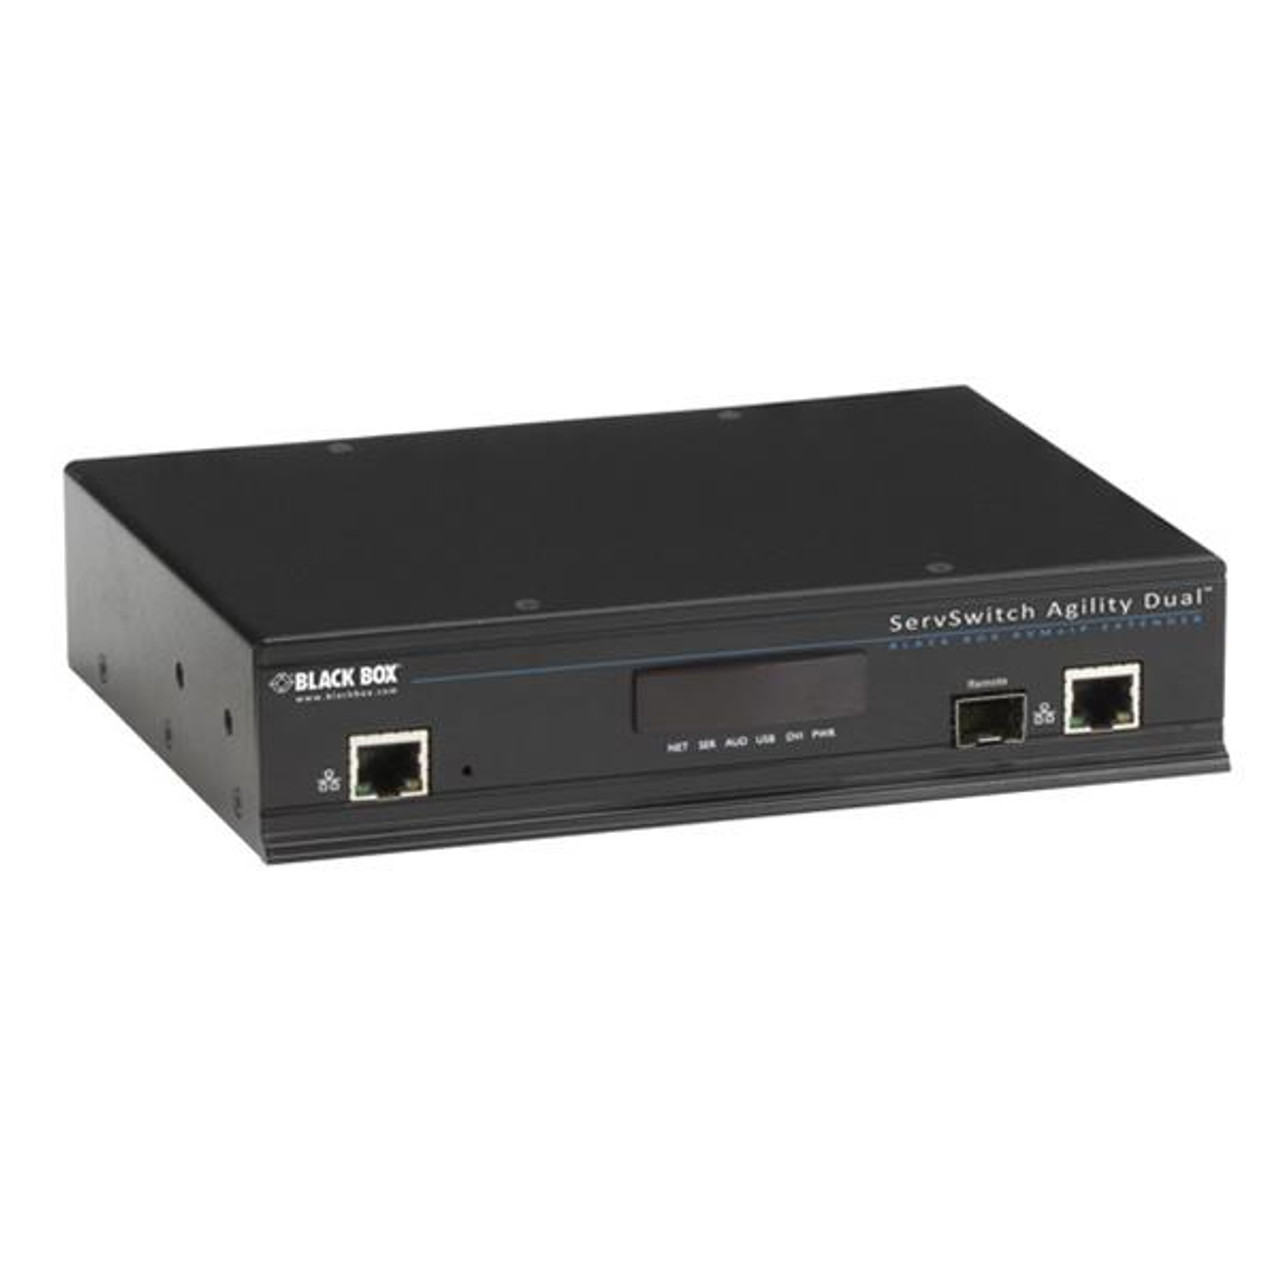 ACR1002A-R Black Box ServSwitch Agility Dual DVI USB and Audio KVM Extender over IP Dual-Head or Dual-Link Receiver